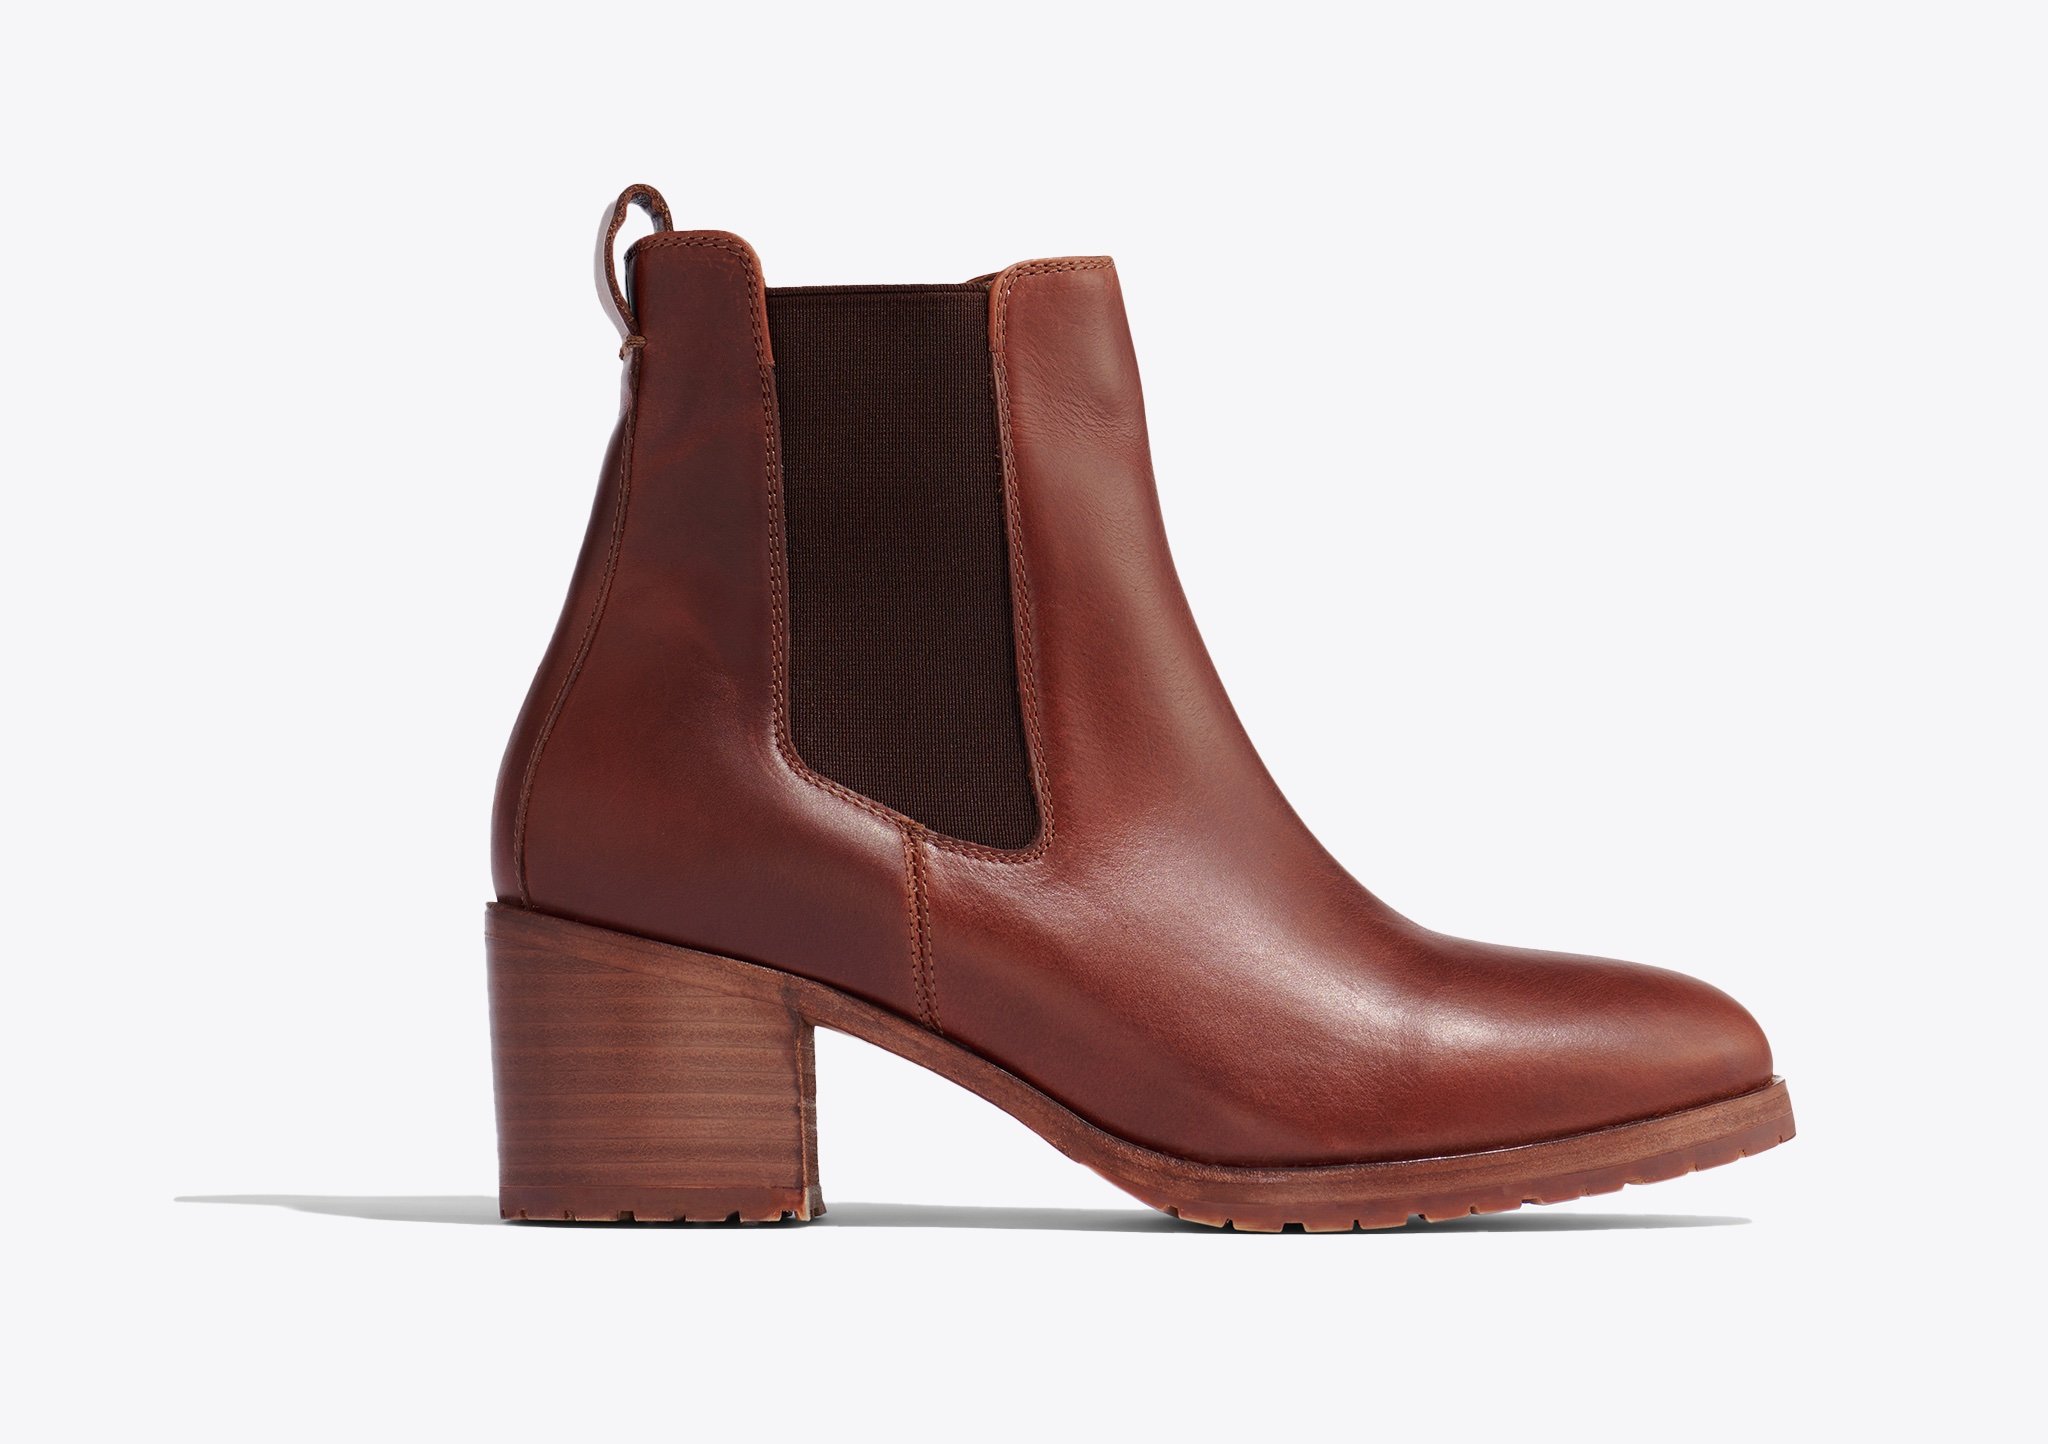 Nisolo Ana Go-To Heeled Chelsea Boot Auburn - Every Nisolo product is built on the foundation of comfort, function, and design. 